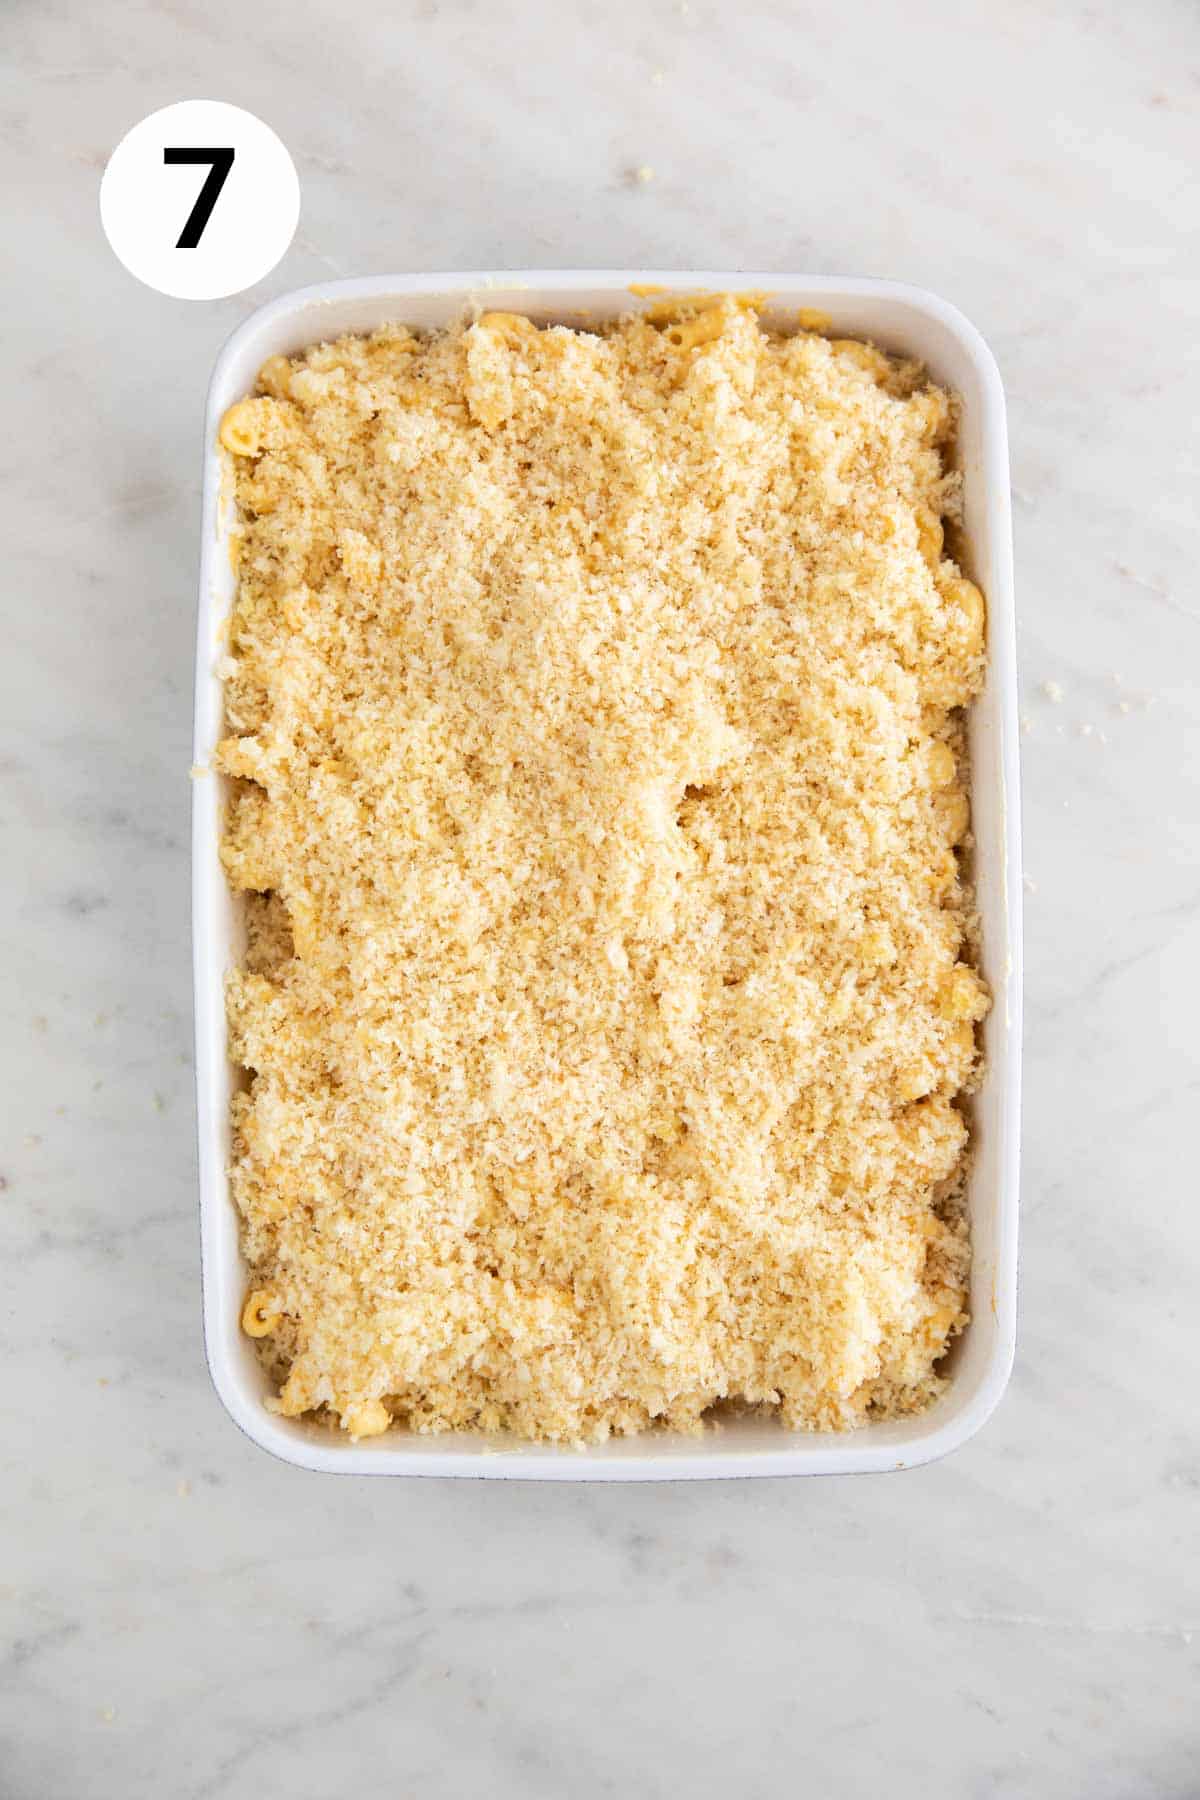 Baking dish with vegan mac and cheese topped with breadcrumbs before baking.